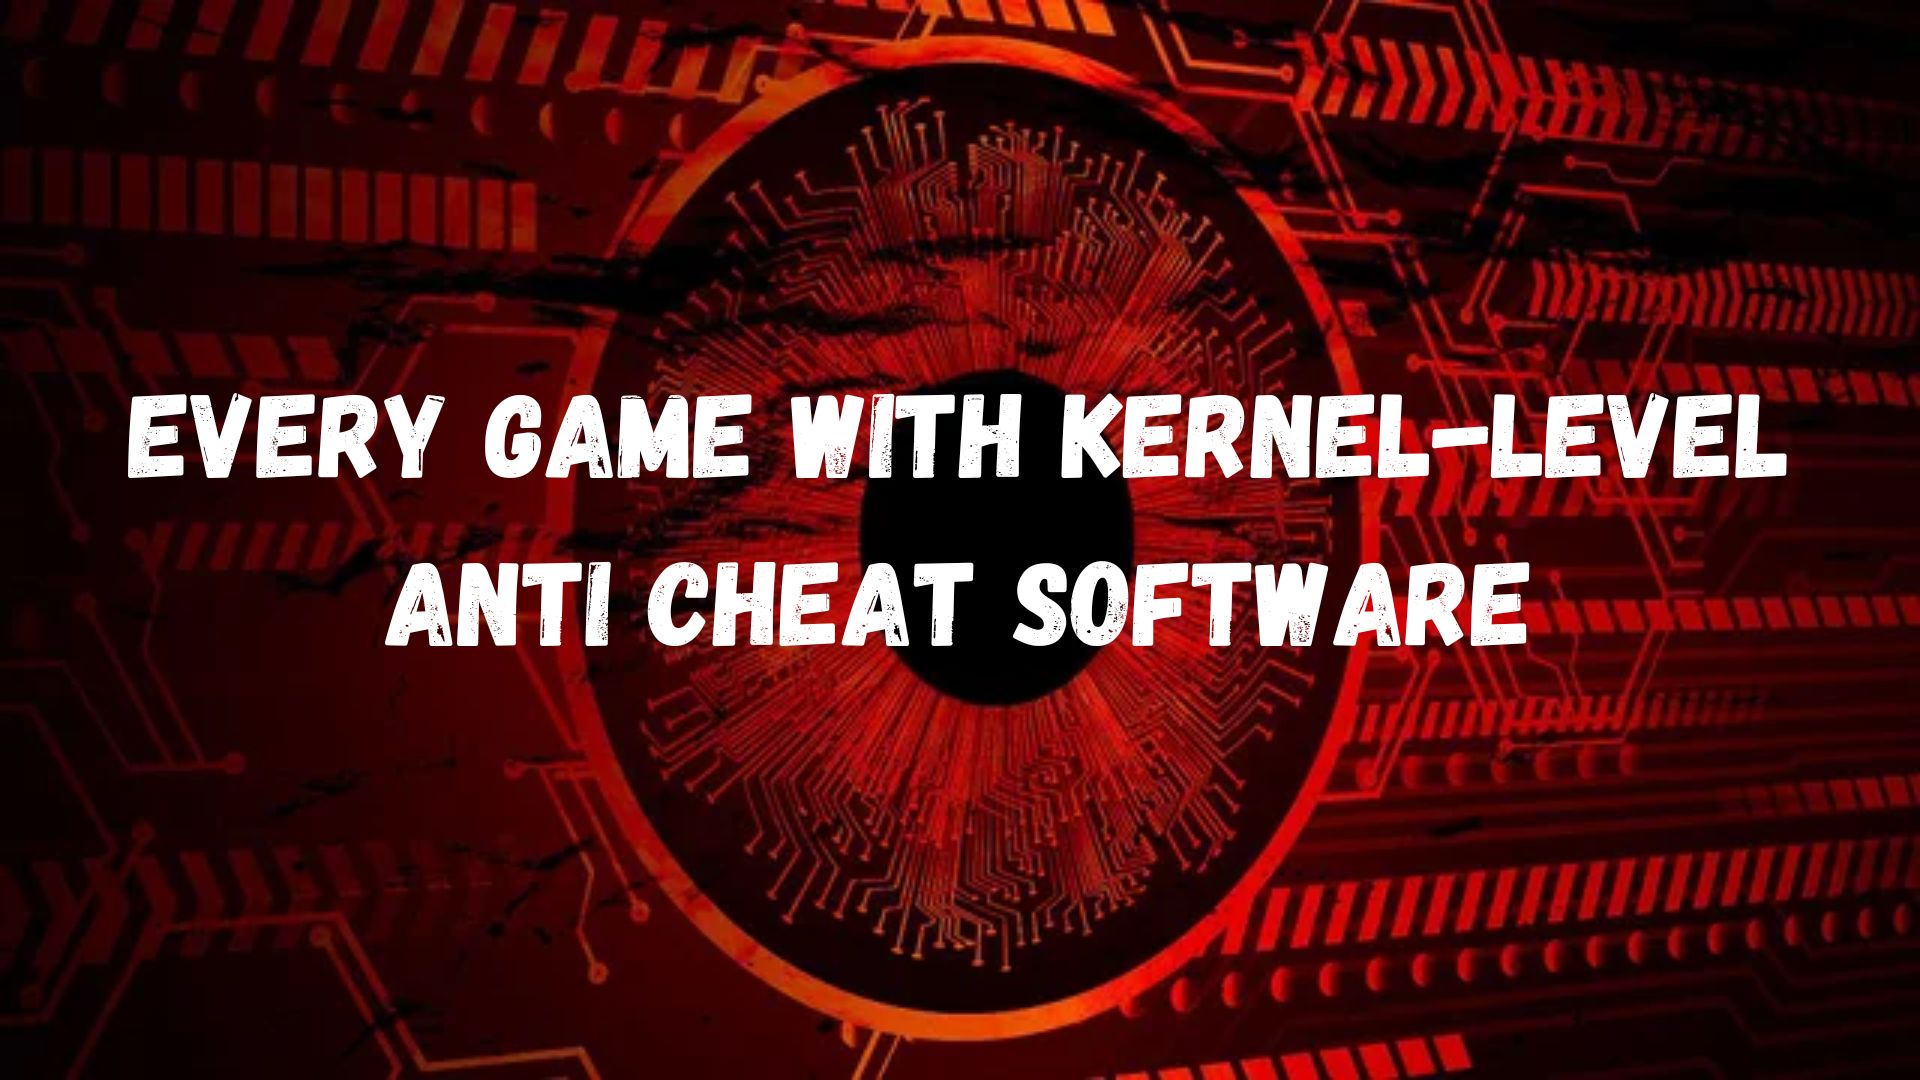 Every game with kernel-level anti cheat software